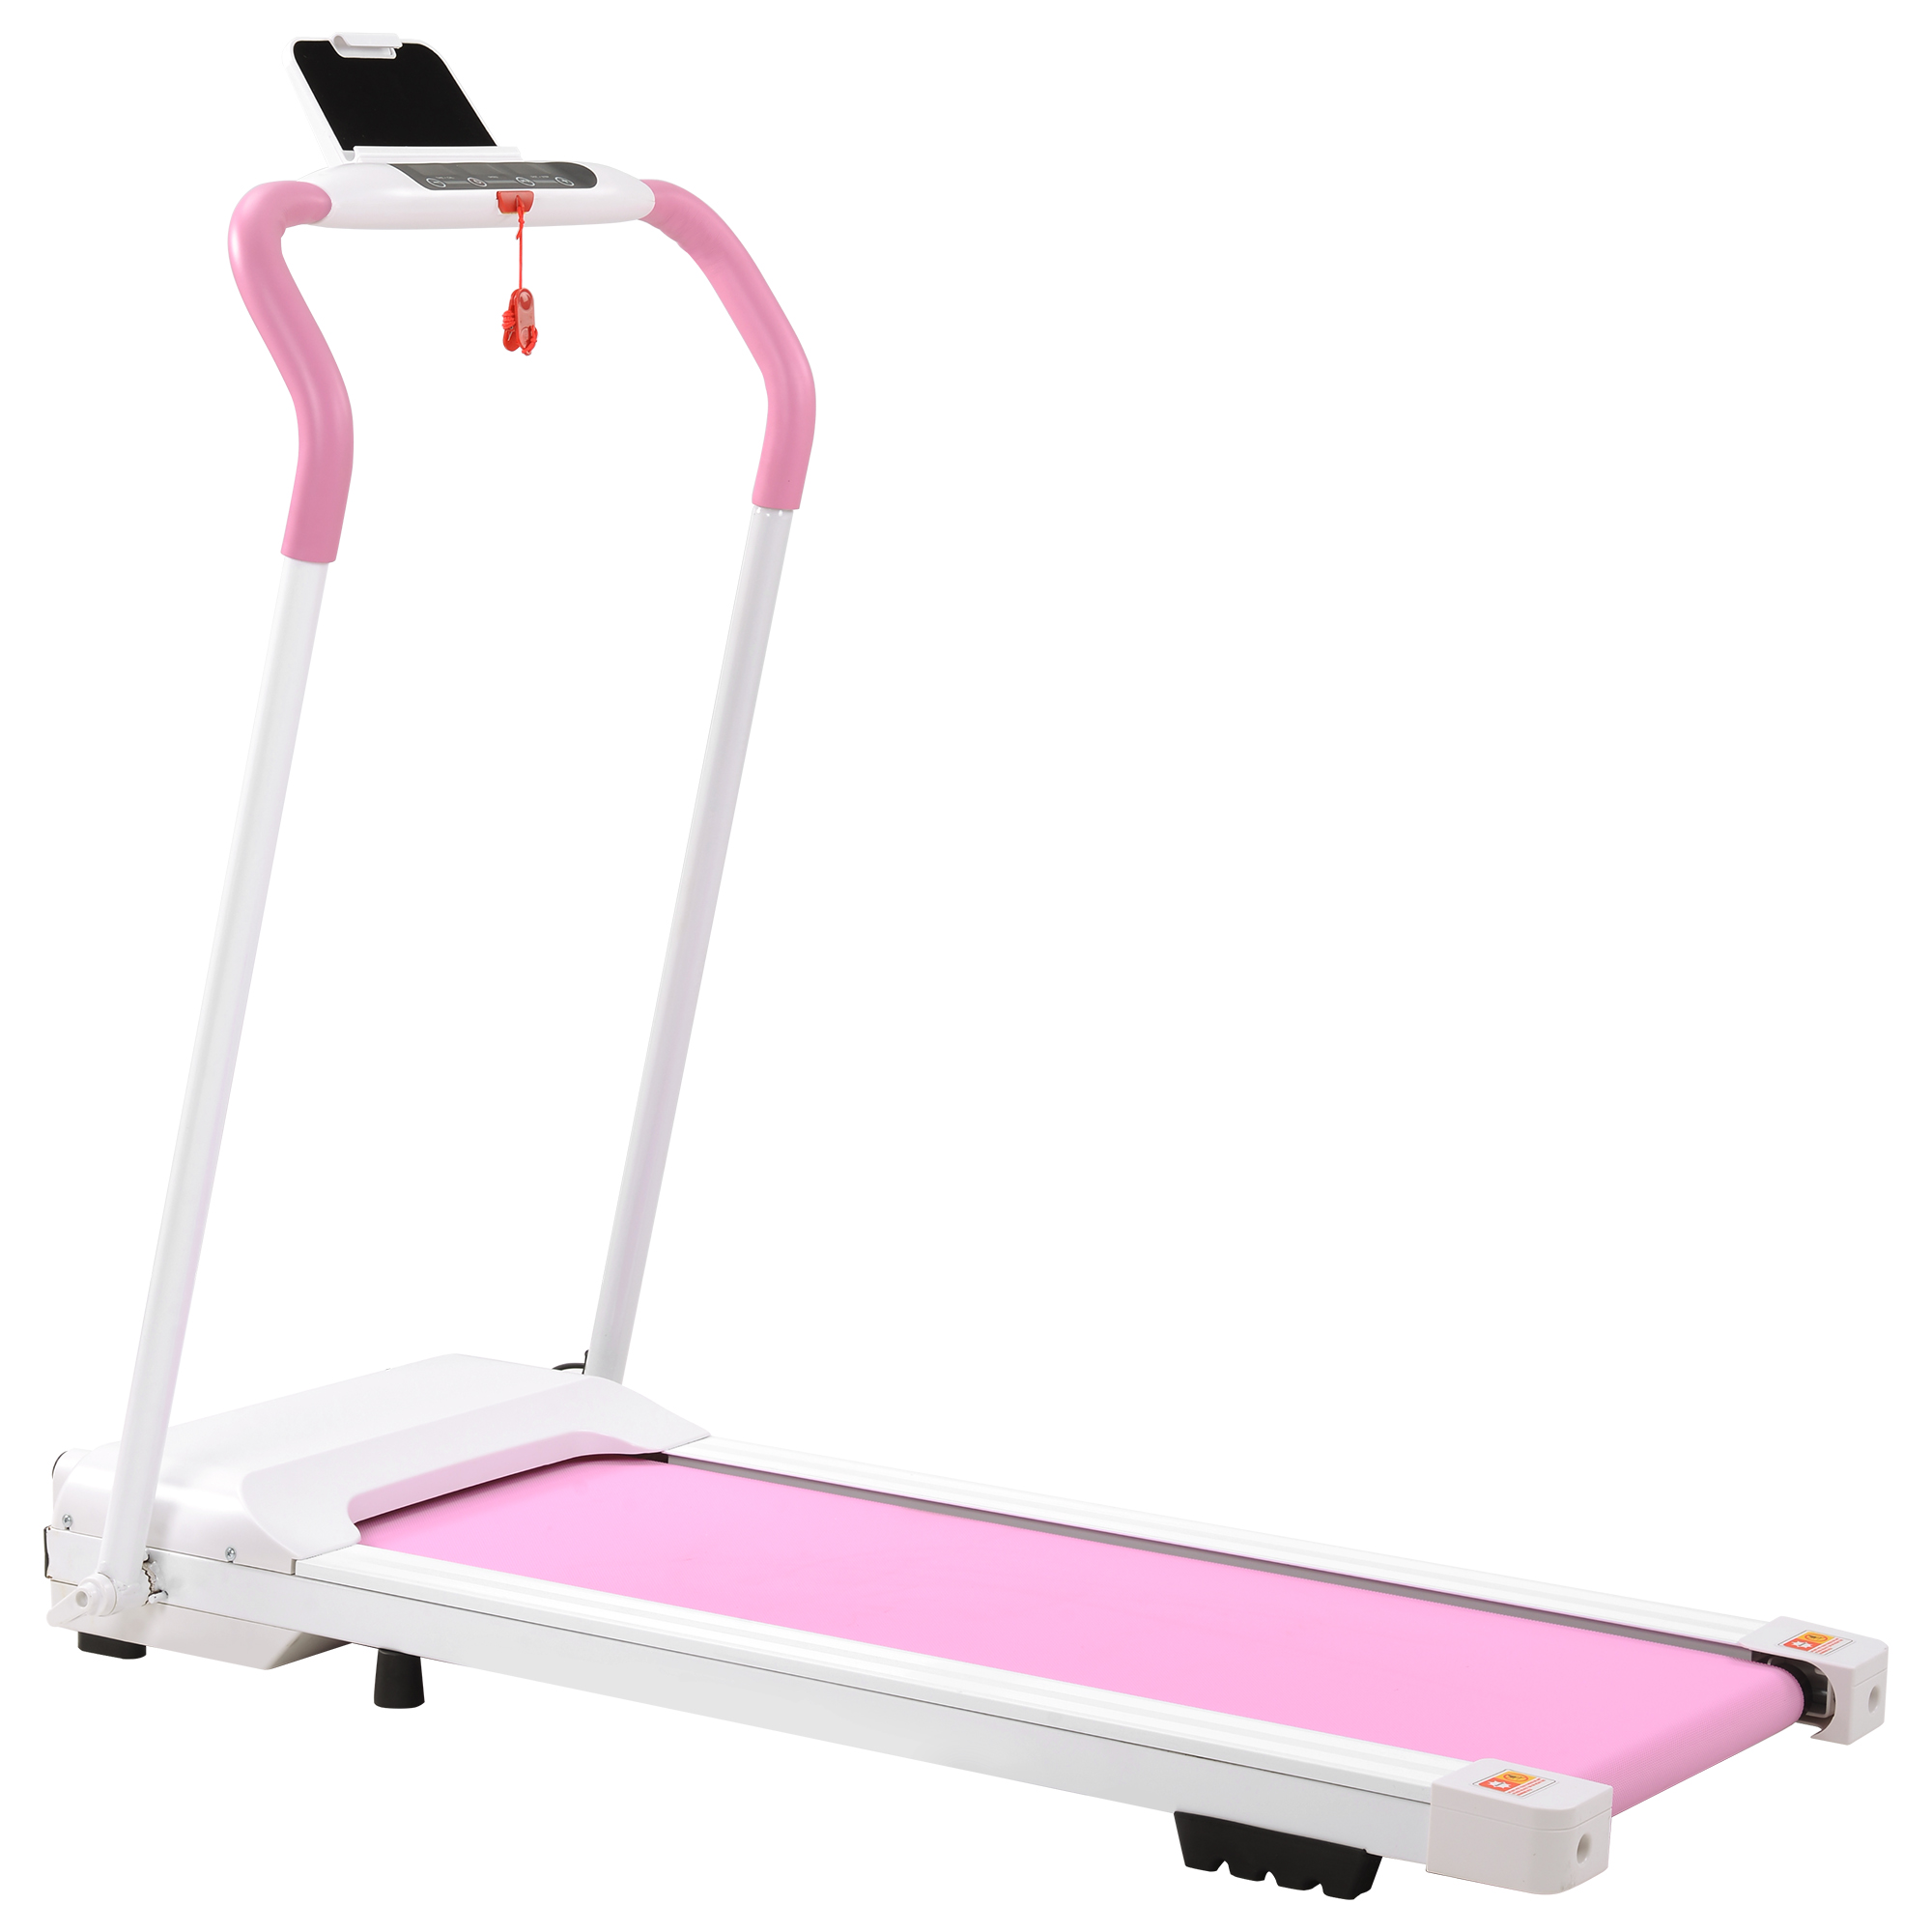 FYC Treadmill Folding Treadmill for Home Portable Electric Motorized Treadmill Running Exercise Machine Compact Treadmill for Home Gym Fitness Workout Walking, No Installation Required, WhitePink-Boyel Living